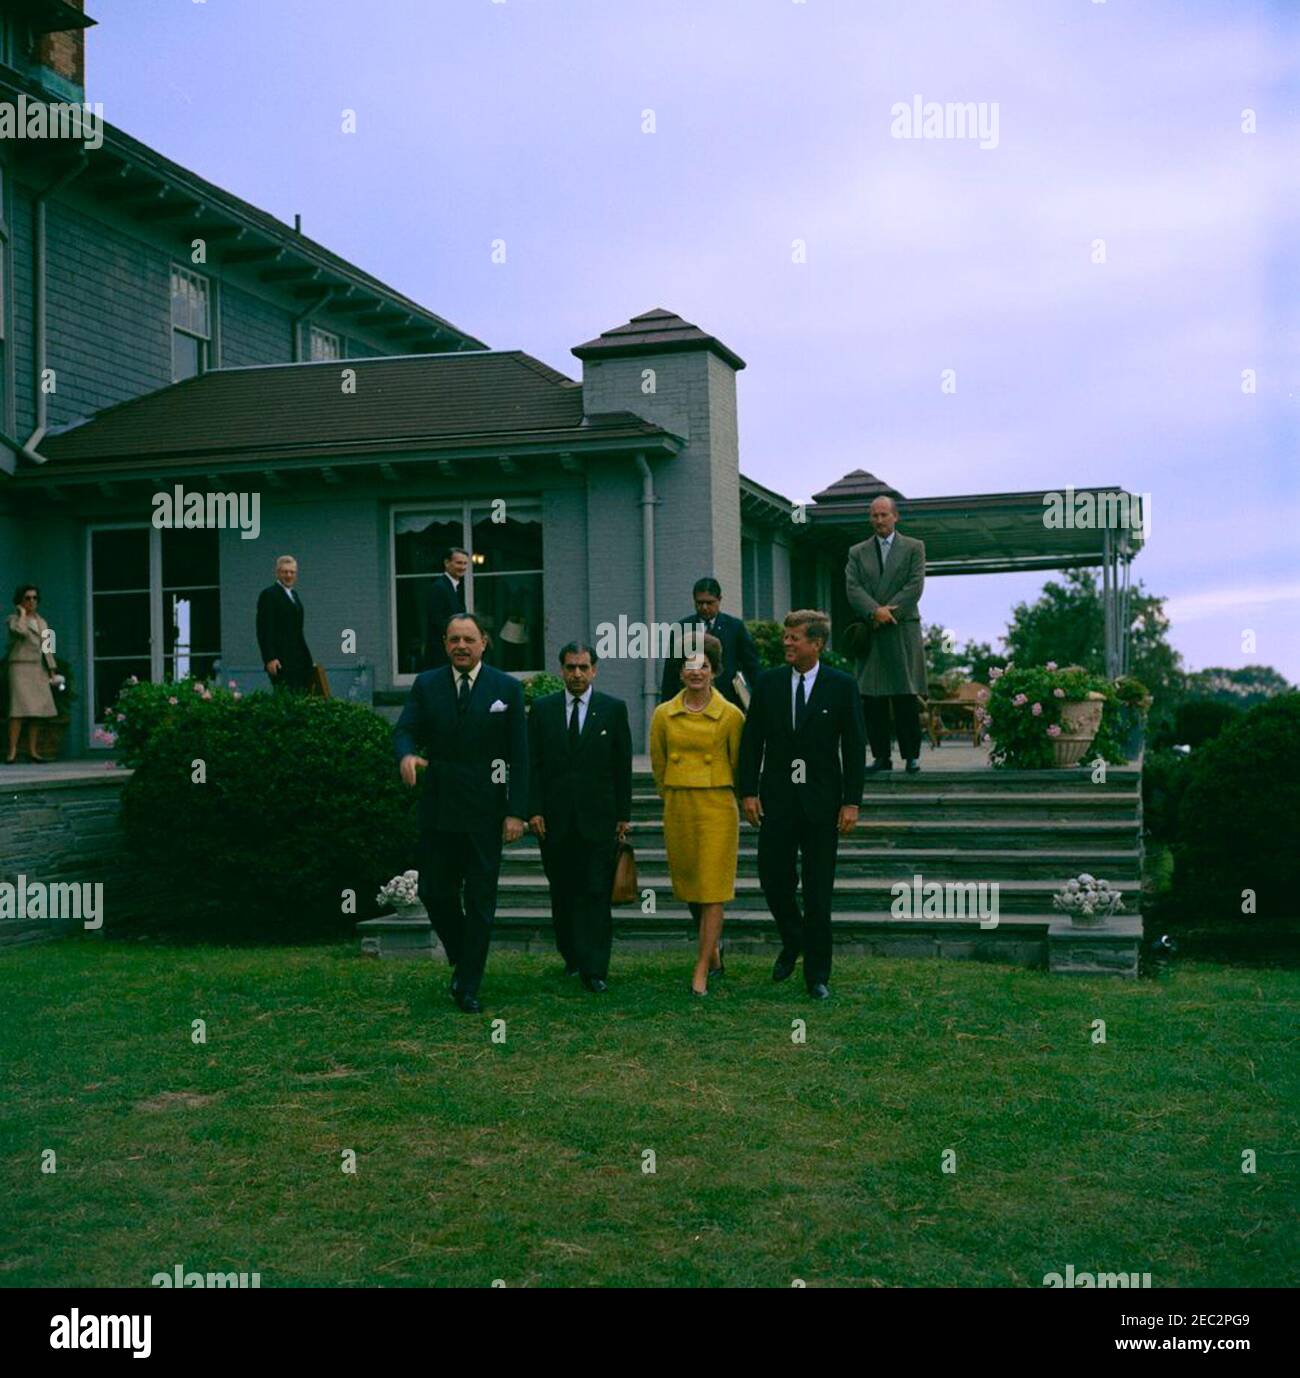 Visit of Muhammad Ayub Khan, President of Pakistan, Newport, Rhode Island. President John F. Kennedy and First Lady Jacqueline Kennedy visit with President of Pakistan, Muhammad Ayub Khan, at Hammersmith Farm in Newport, Rhode Island. Left to right (in foreground): President Ayub Khan; Ambassador of Pakistan, Aziz Ahmed; Mrs. Kennedy; President Kennedy. Also pictured: U.S. Assistant Secretary of State for Near Eastern and South Asian Affairs, Phillips Talbot; U.S. Ambassador to Pakistan, Walter P. McConaughy; Secretary of Information in the Ministry of Education and Information of Pakistan, Qu Stock Photo